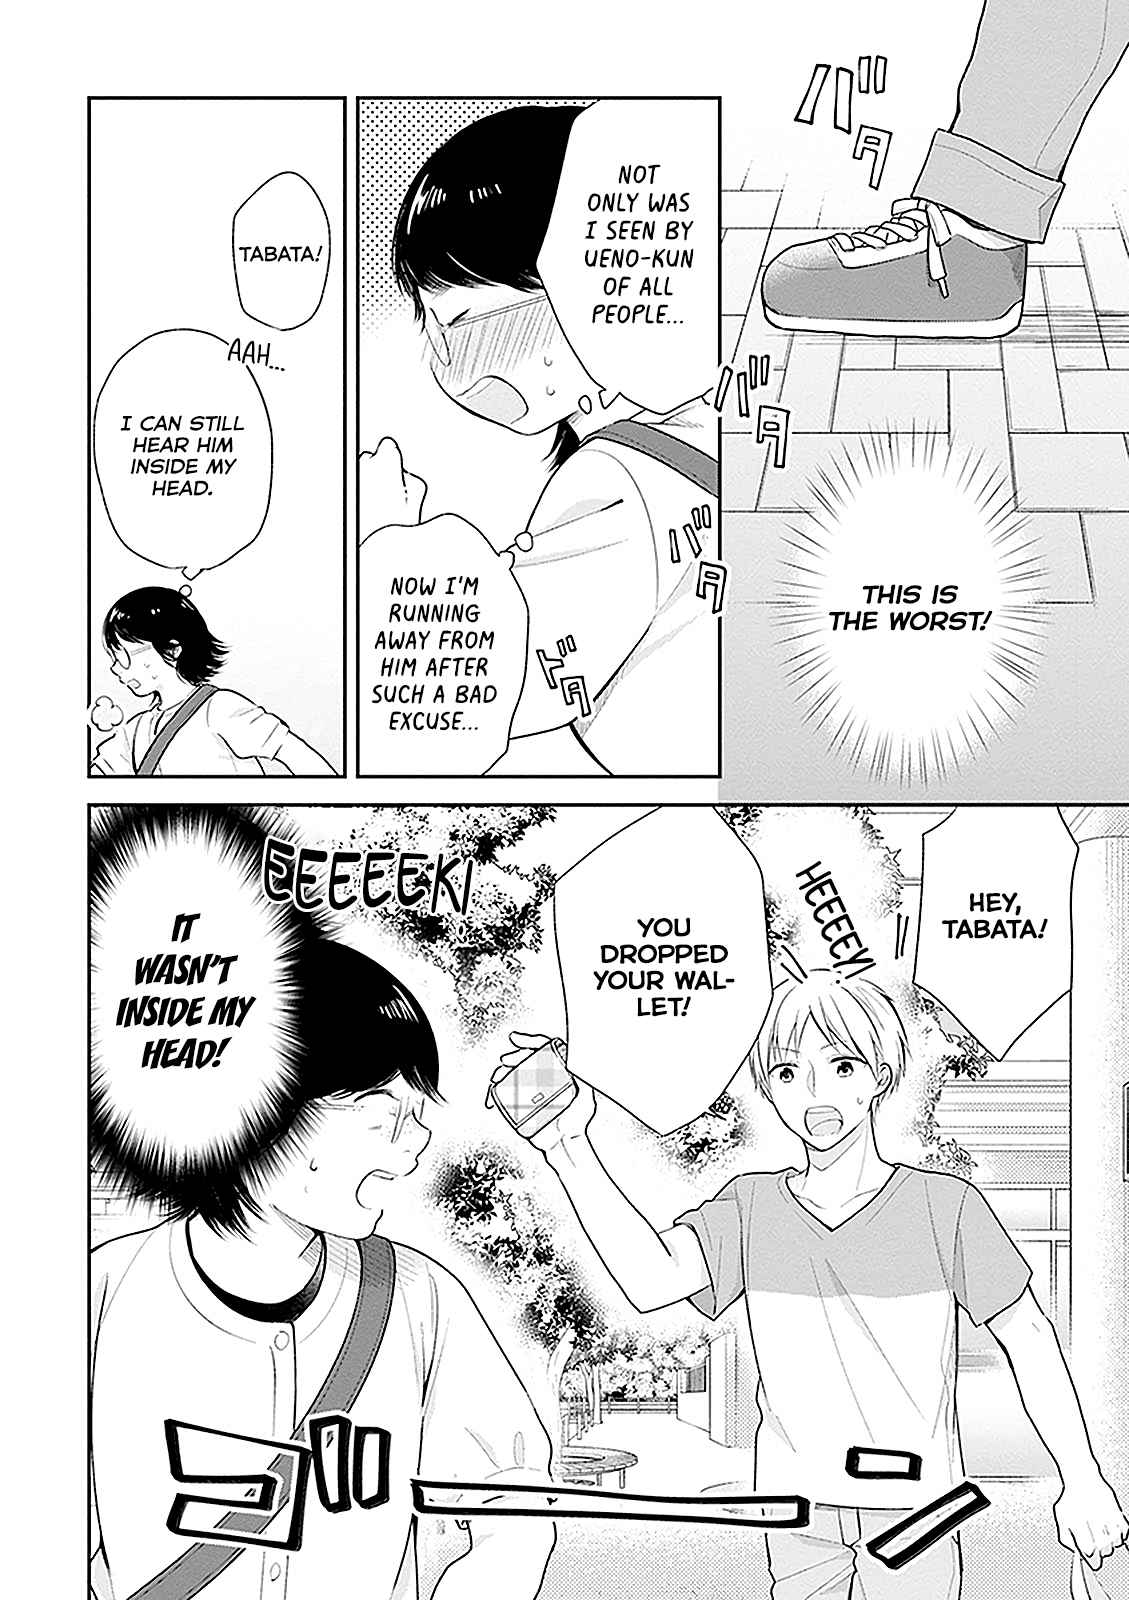 A Bouquet for an Ugly Girl Vol. 3 Ch. 13 Careful With Makeovers